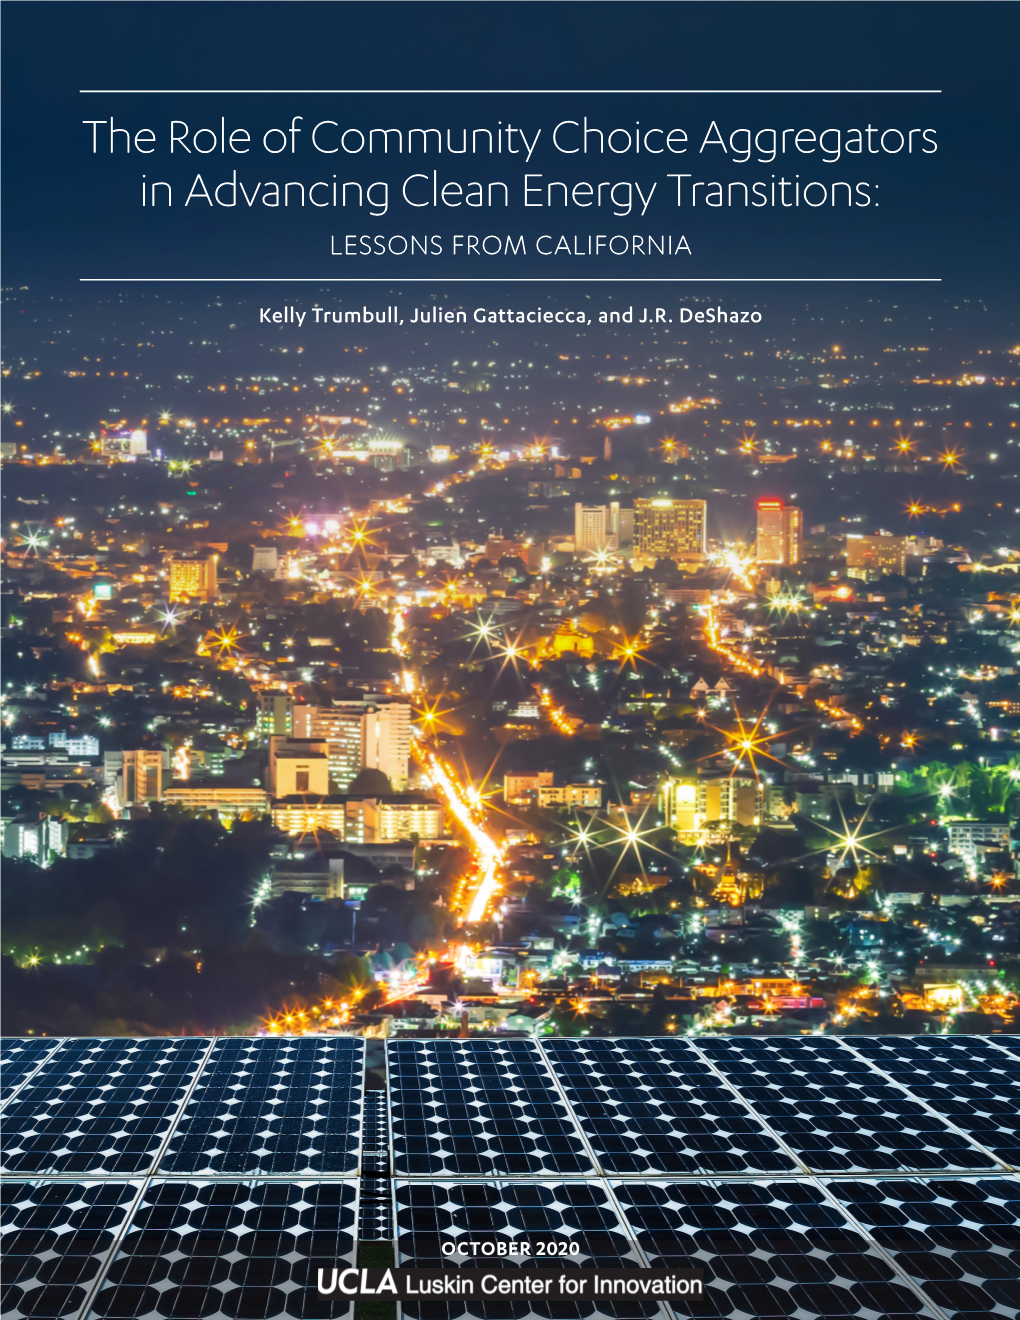 The Role of Community Choice Aggregators in Advancing Clean Energy Transitions: LESSONS from CALIFORNIA